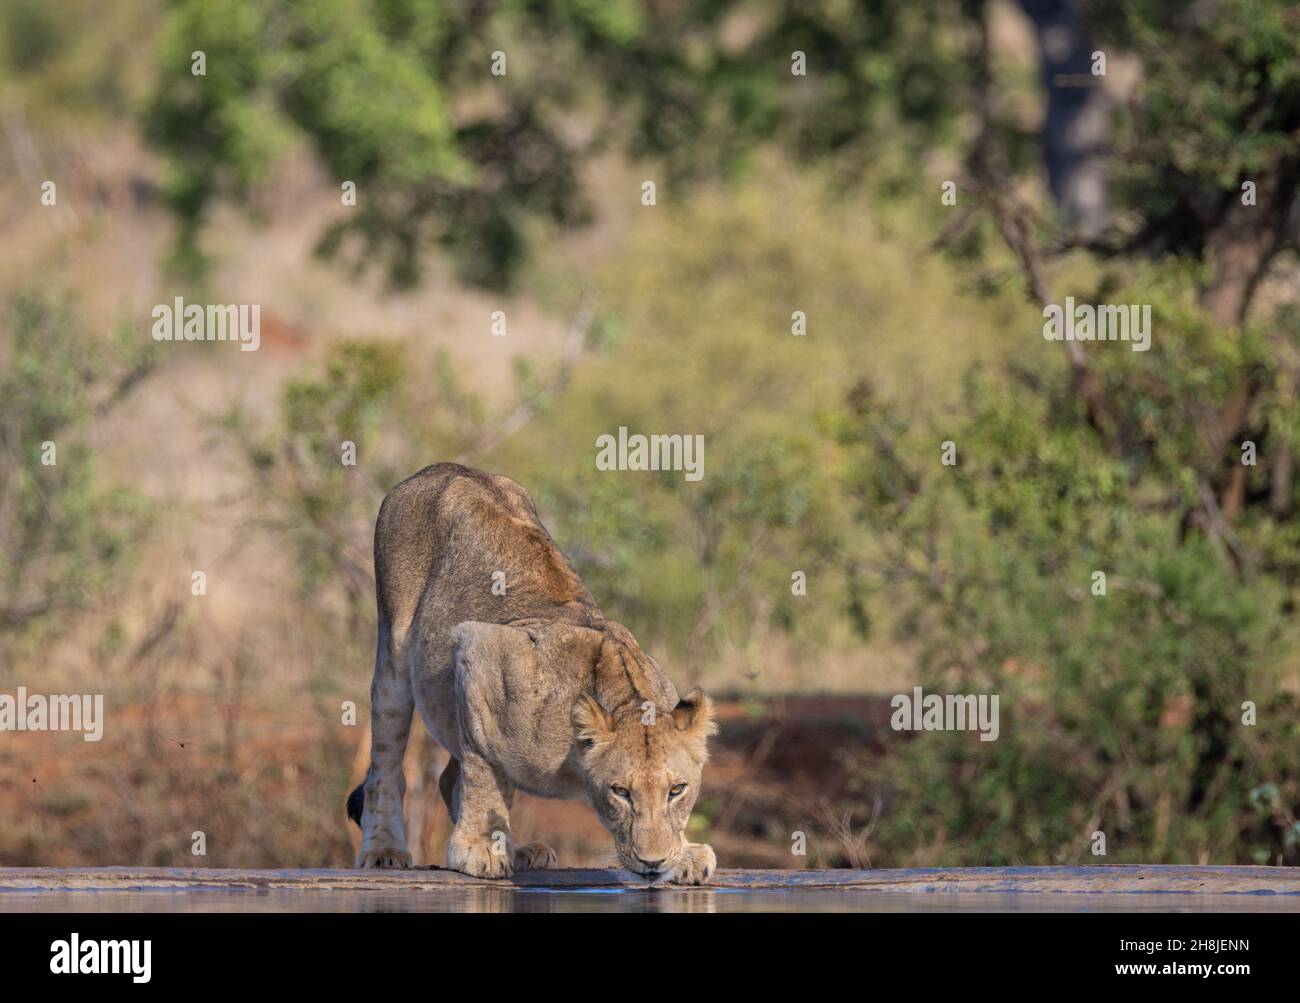 A lioness drinks from a waterhole in the Kruger National Park, South Africa on one of the hottest days of the year, 2021. Stock Photo